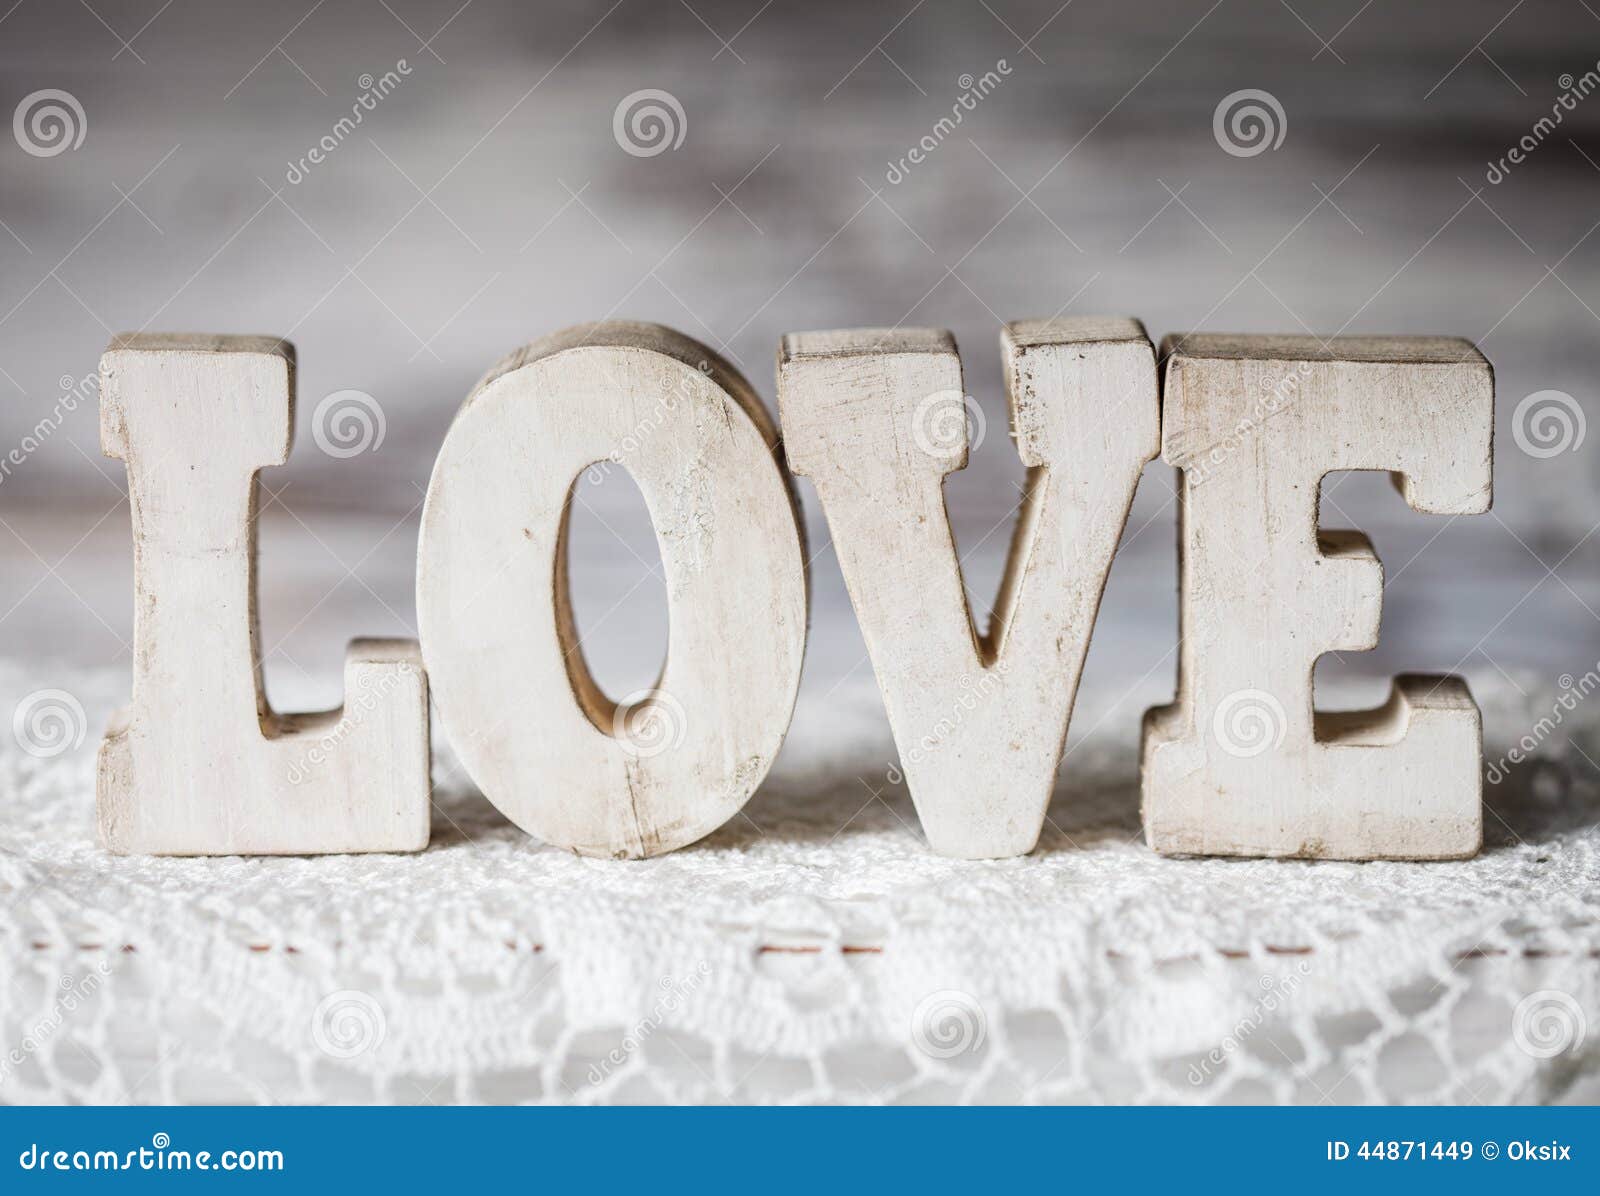 Love wooden letters stock image. Image of chic, love - 44871449